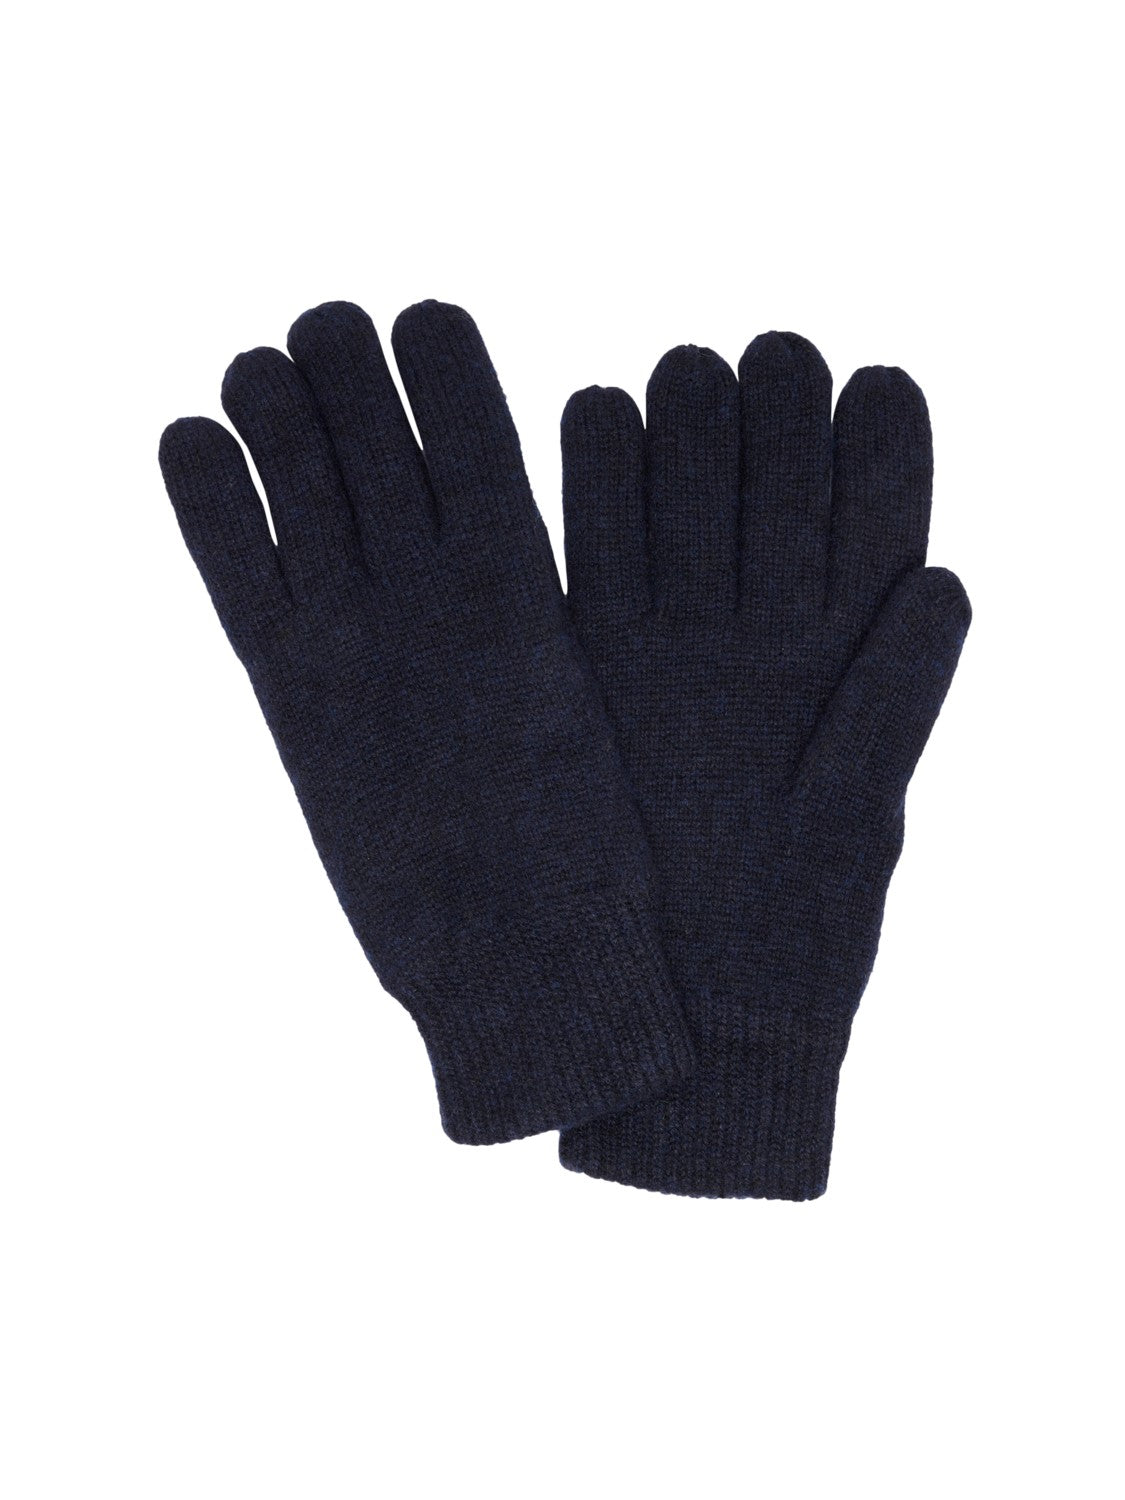 cray knitted gloves - sky captain